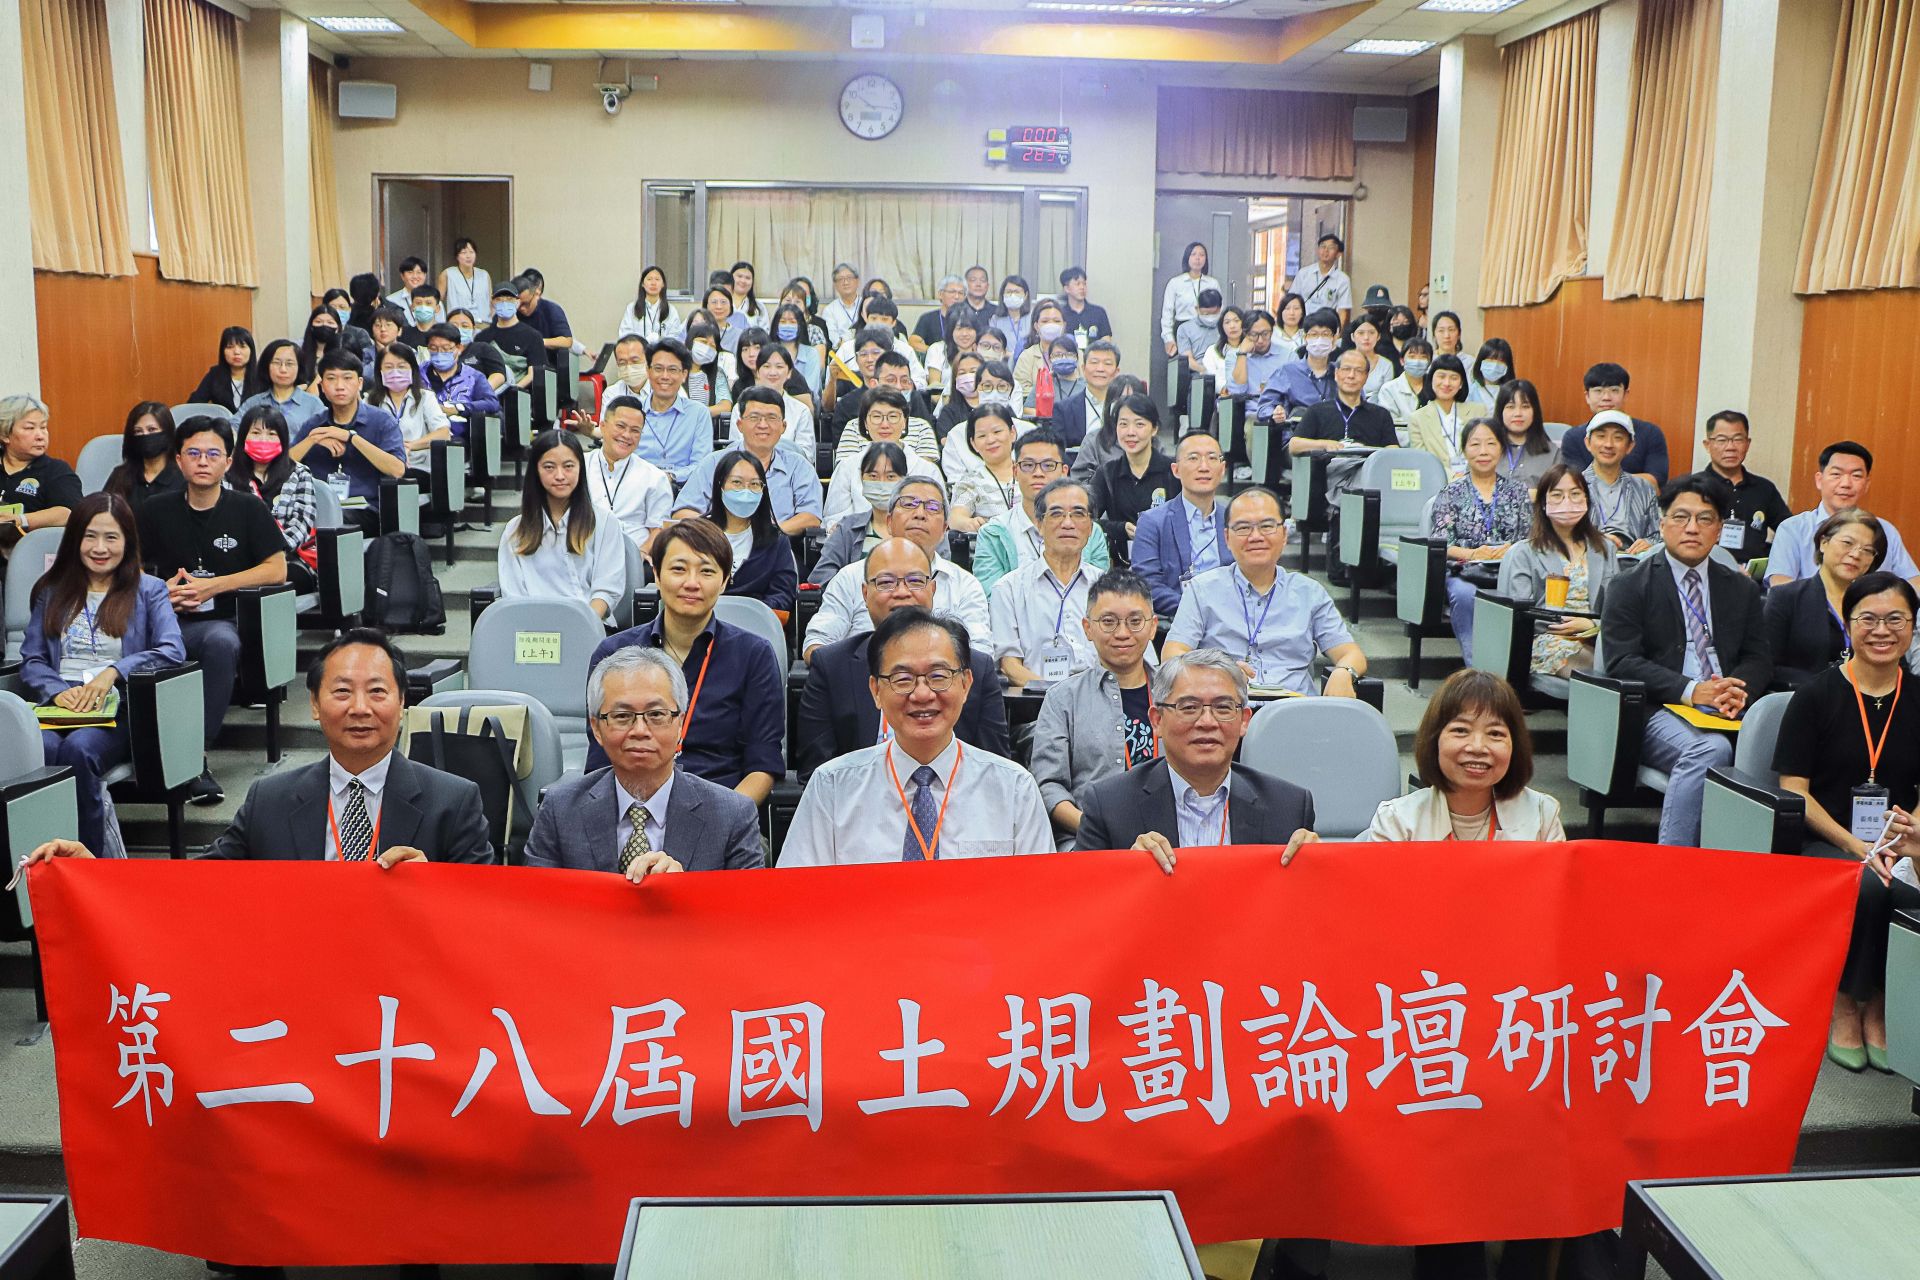 200+ attendees joined NCKU's 28th National Land Planning Forum to advance consensus on national land neutrality.